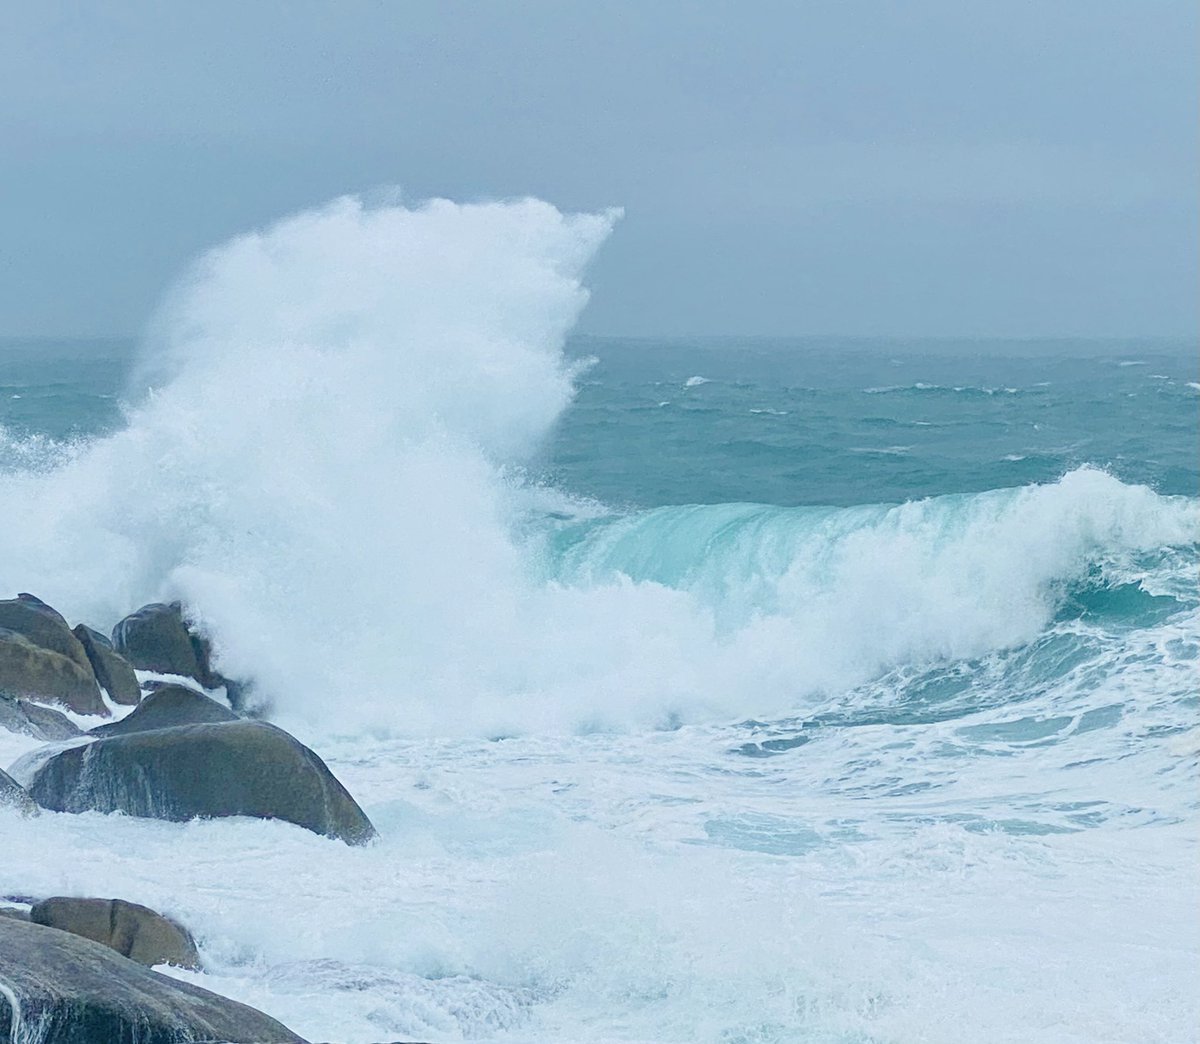 Hard to capture quite how big the sea is today but you get the idea ! 🌊💨🌊 All boats are cancelled to and around the islands tomorrow so expect more of the same ! #islesofscilly #StormKathleen